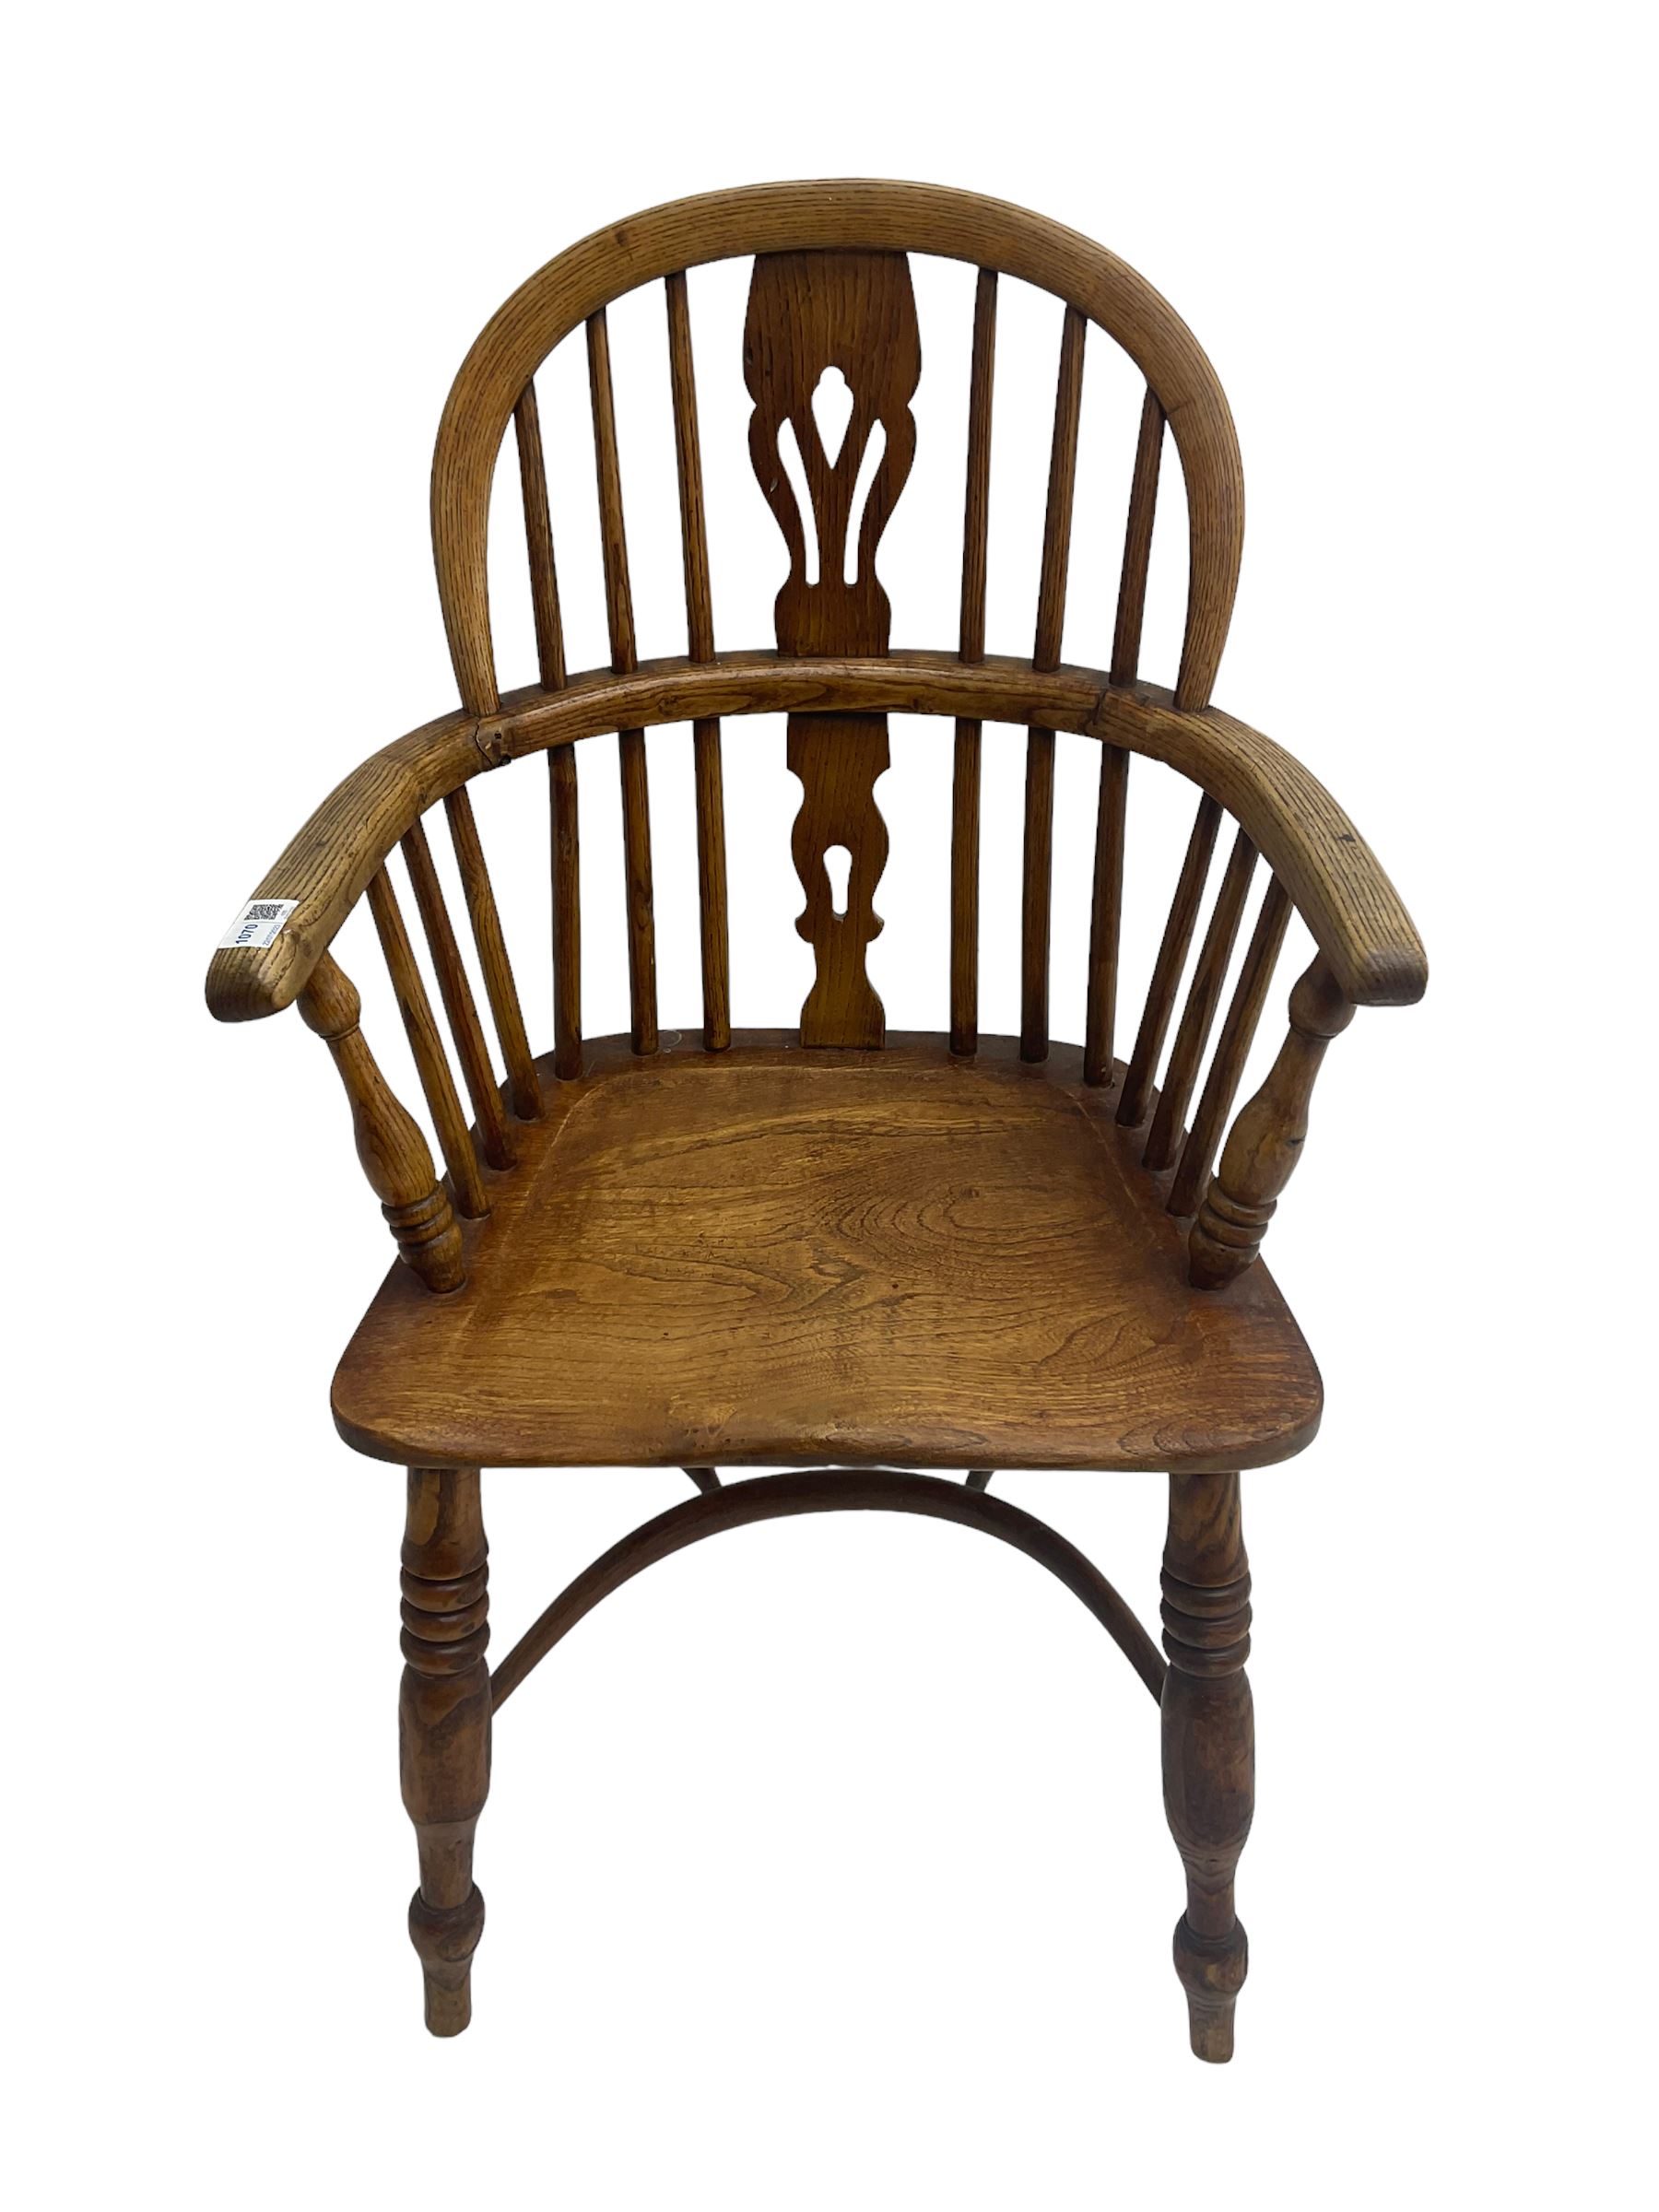 19th century elm and ash Windsor armchair - Image 2 of 6